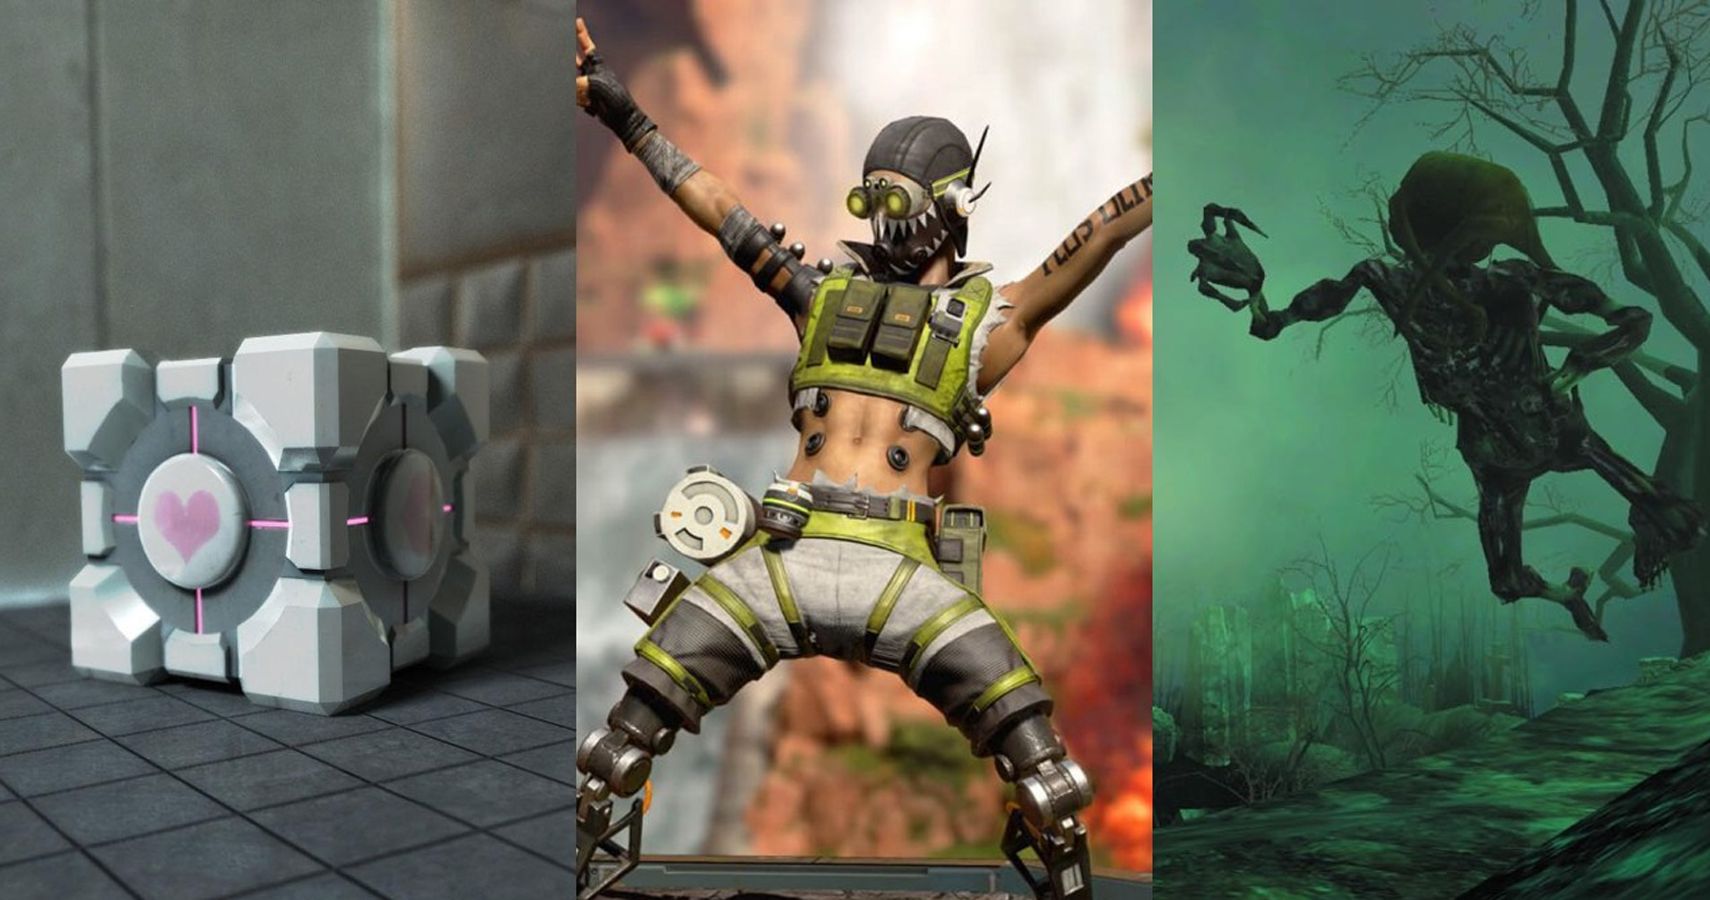 HalfLife And Portal Themed Weapon Charms Coming To Apex Legends Steam Release